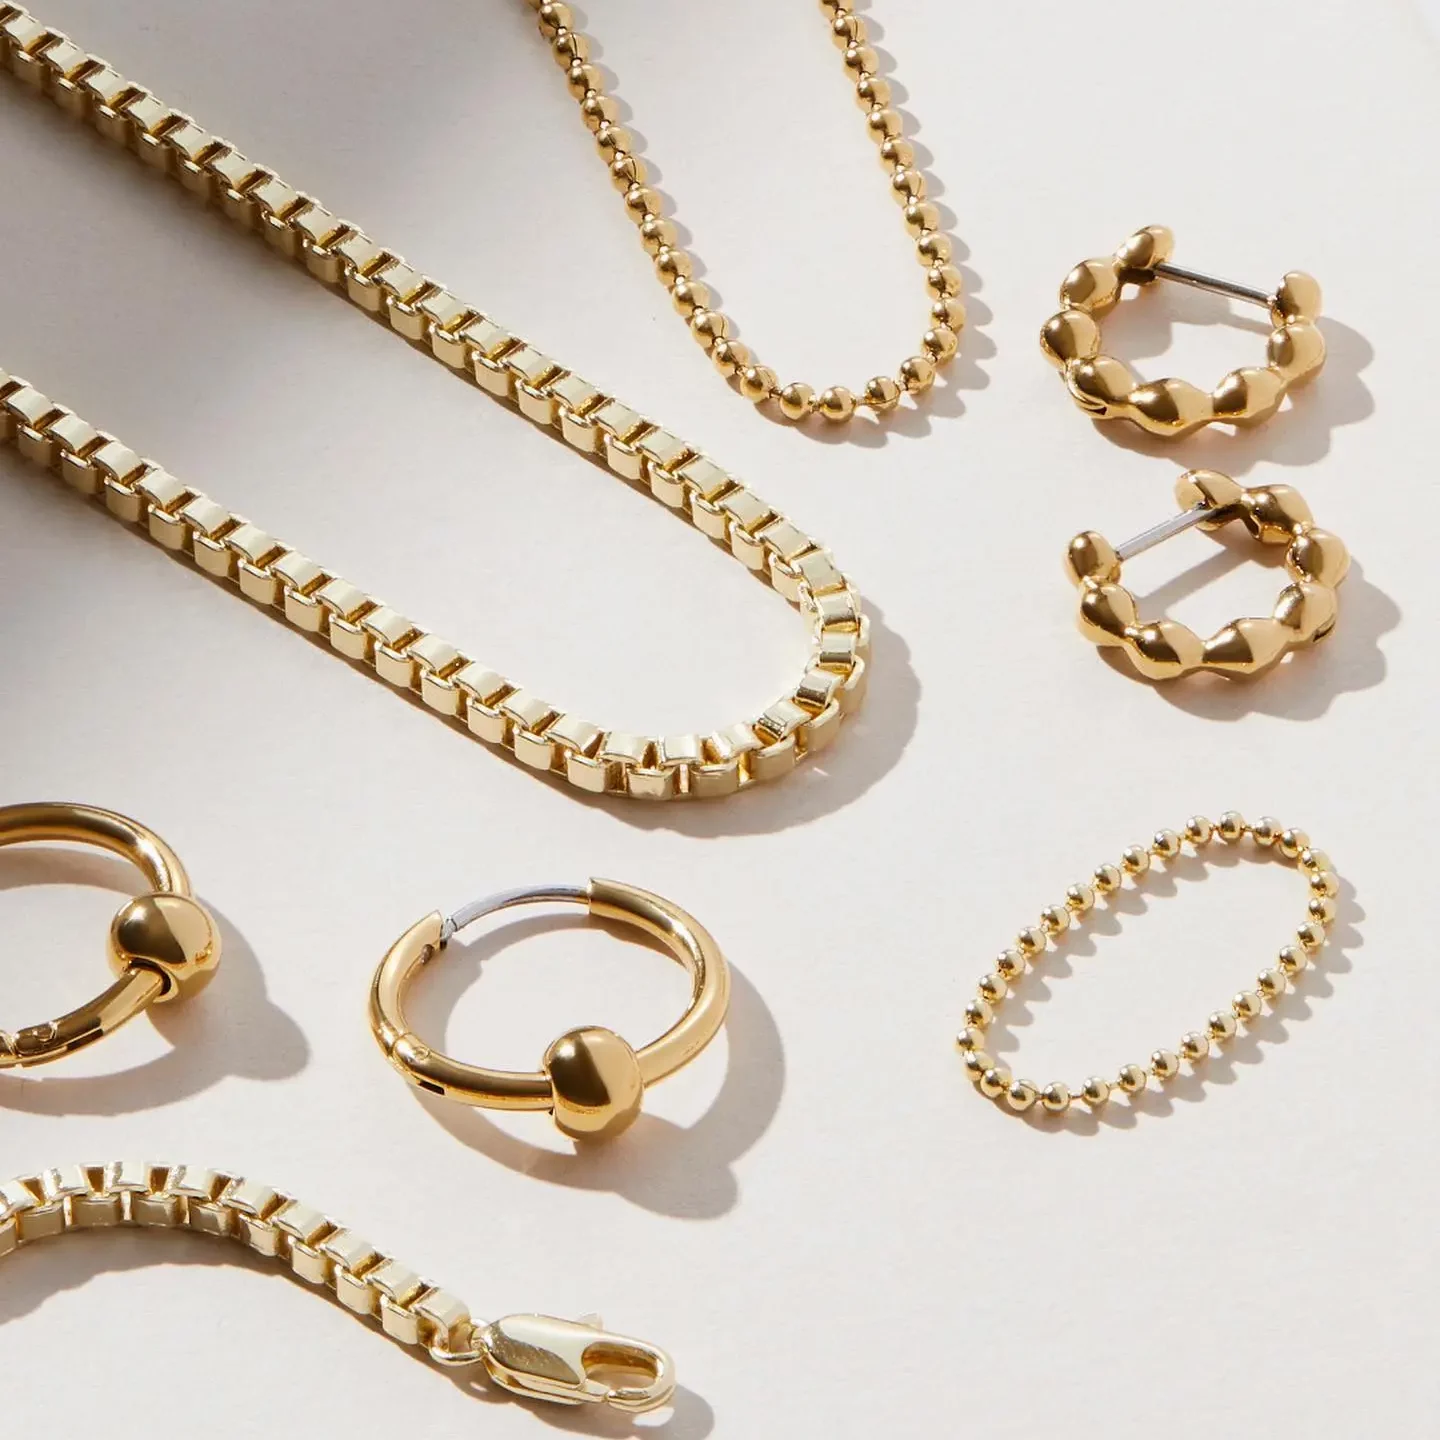 Ana Luisa Jewelry Review: Is This Brand Worth It? | ClothedUp